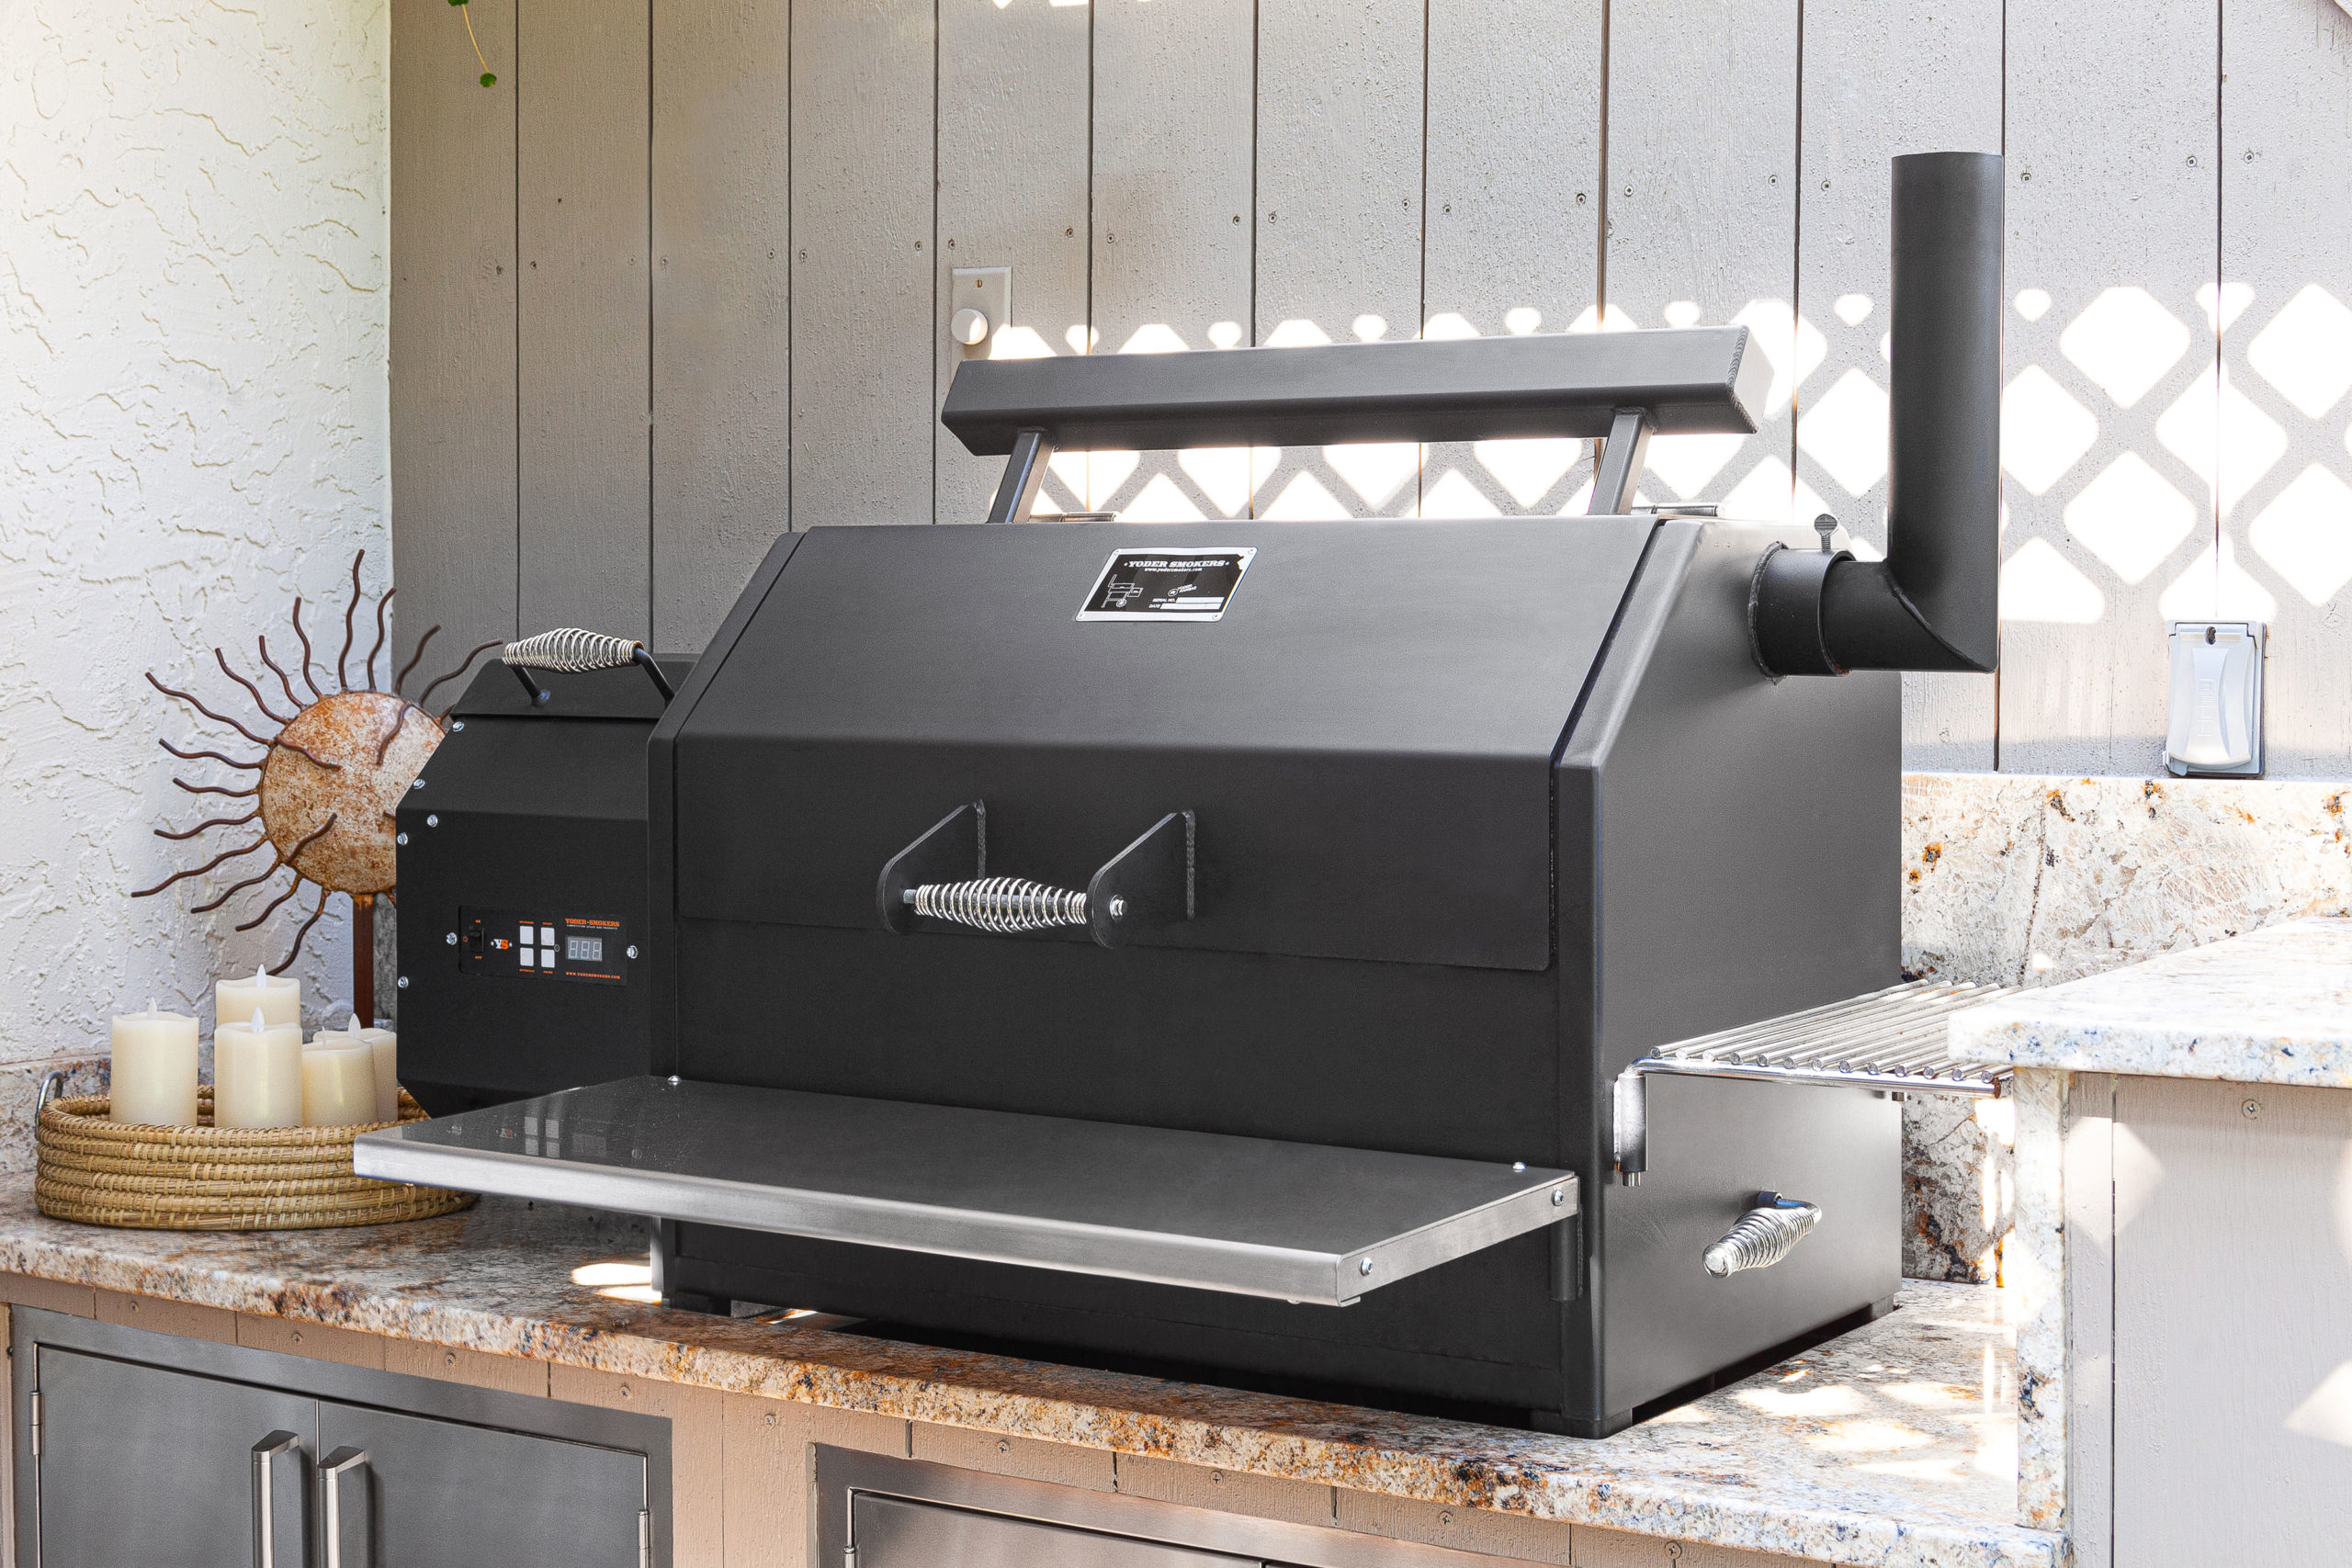 Colorado's largest selection of Built-In Grills, Smokers, Owens, Fireplaces, Outdoor Kitchen Appliances, & more! Your one stop shop for all appliance needs.